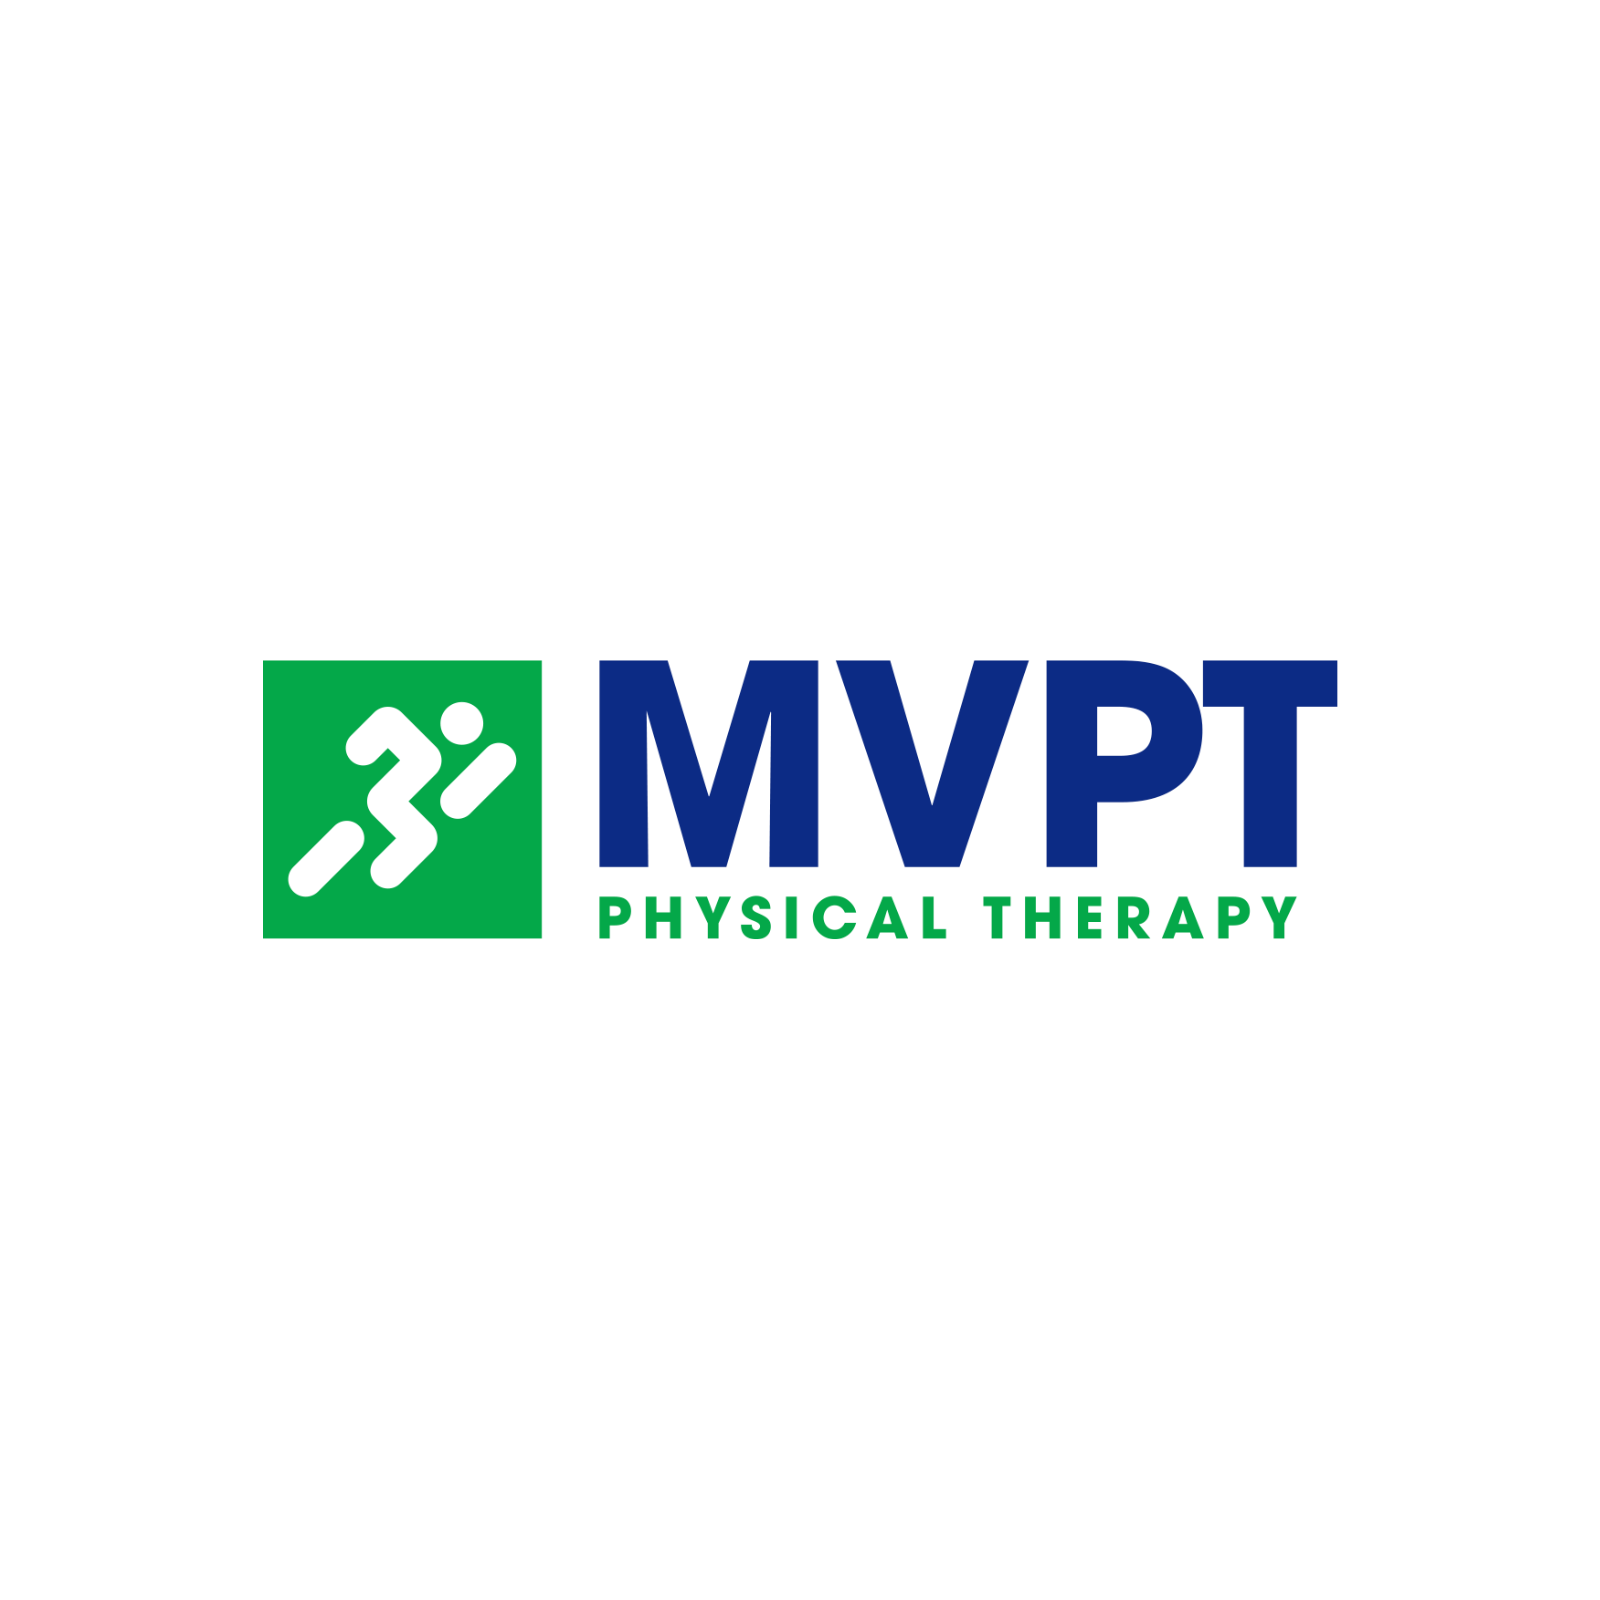 MVPT Physical Therapy - Auburn, NY 13021 - (315)800-0030 | ShowMeLocal.com